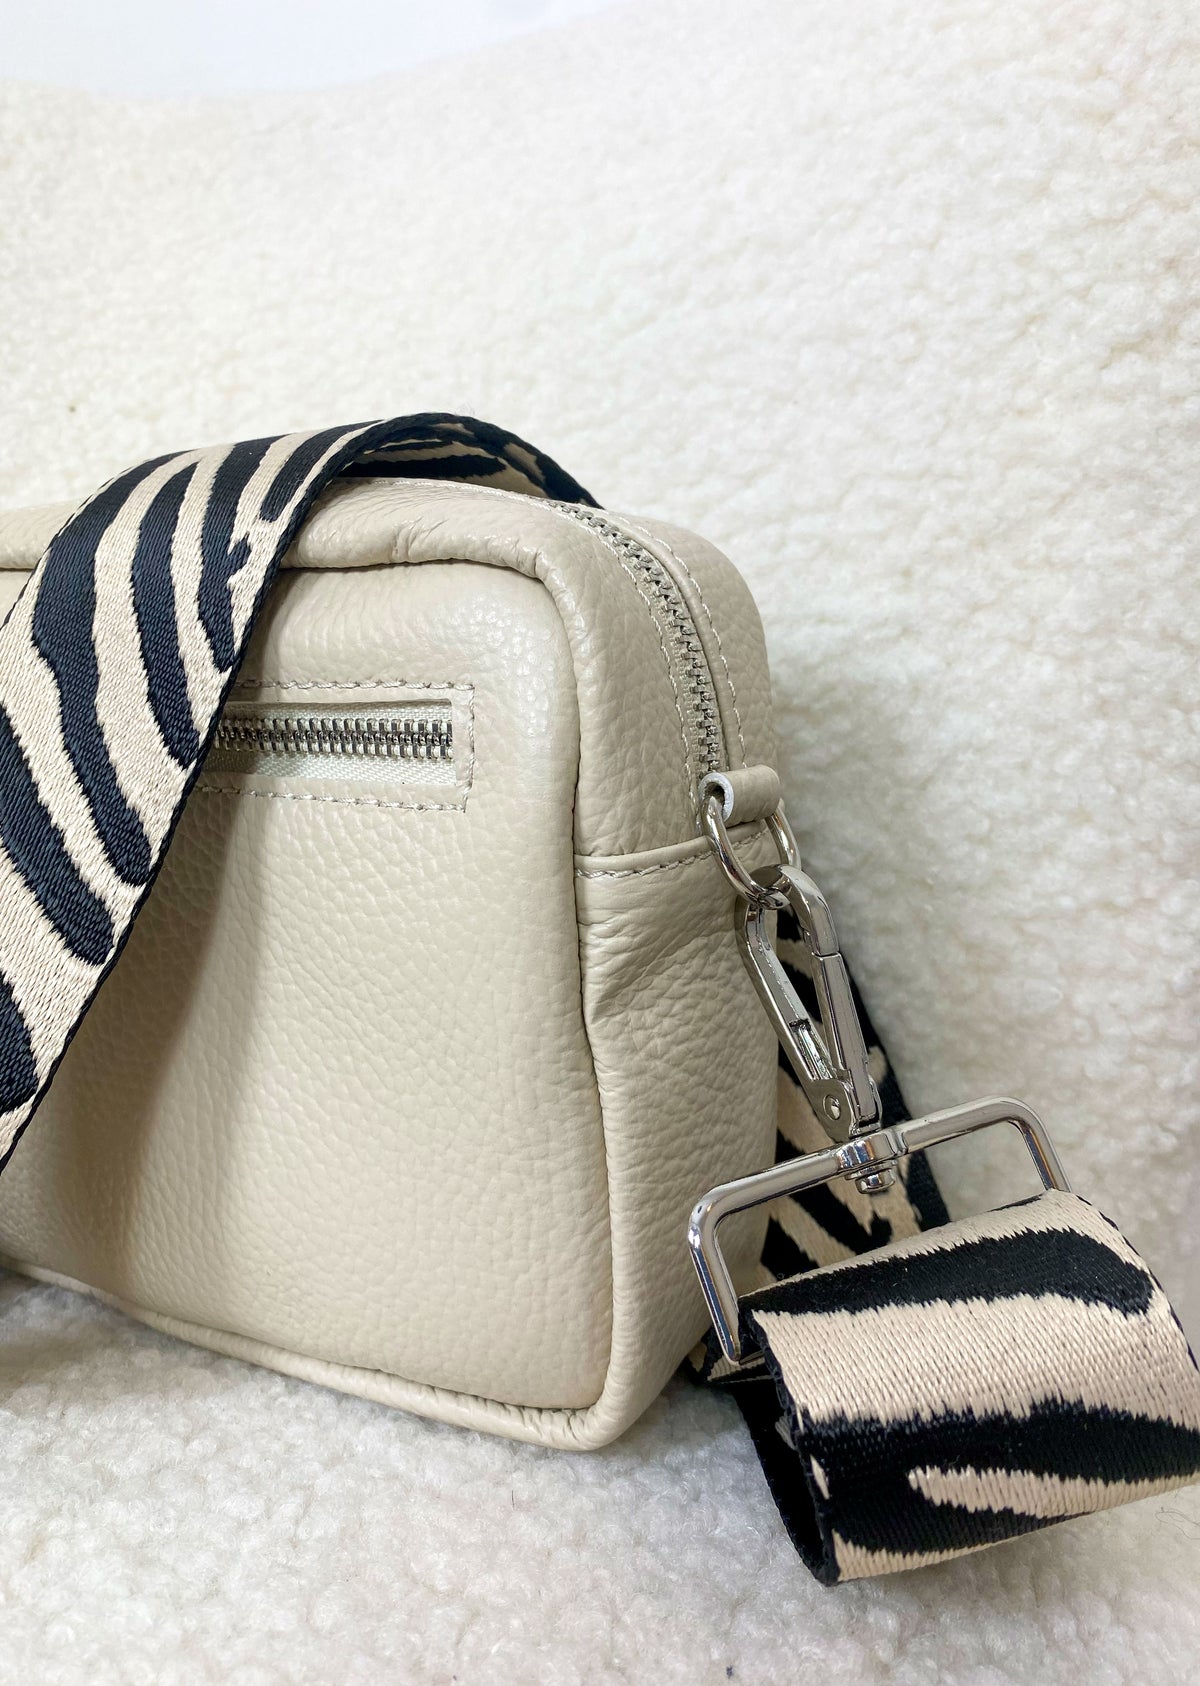 Tribeca Leather Bag - Cream and Tiger Strap